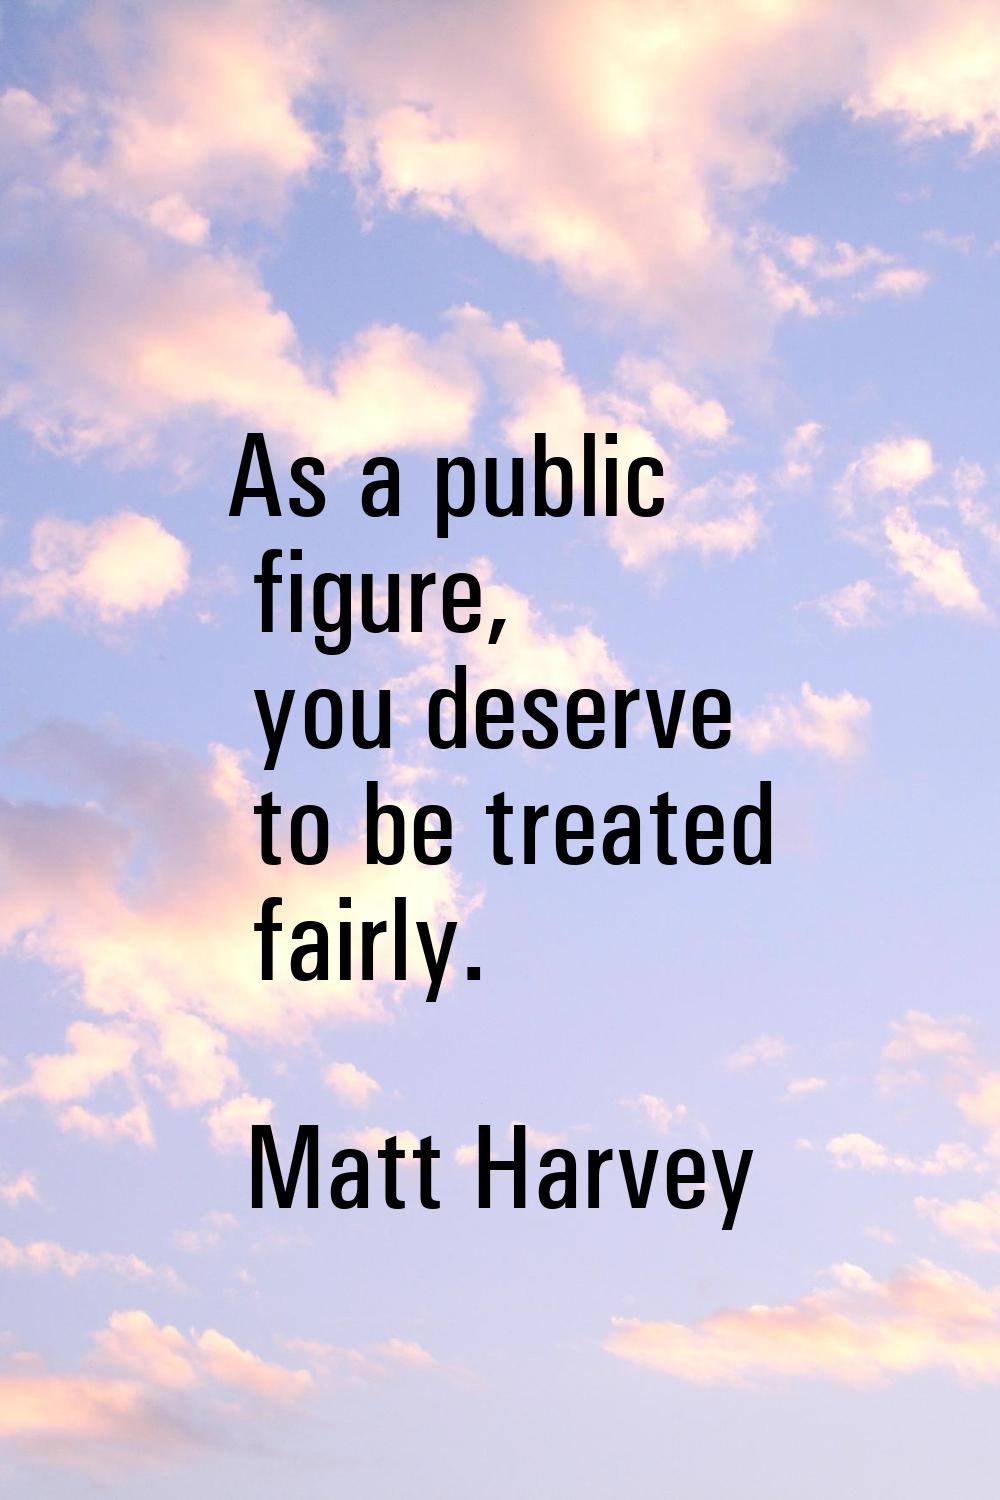 As a public figure, you deserve to be treated fairly.